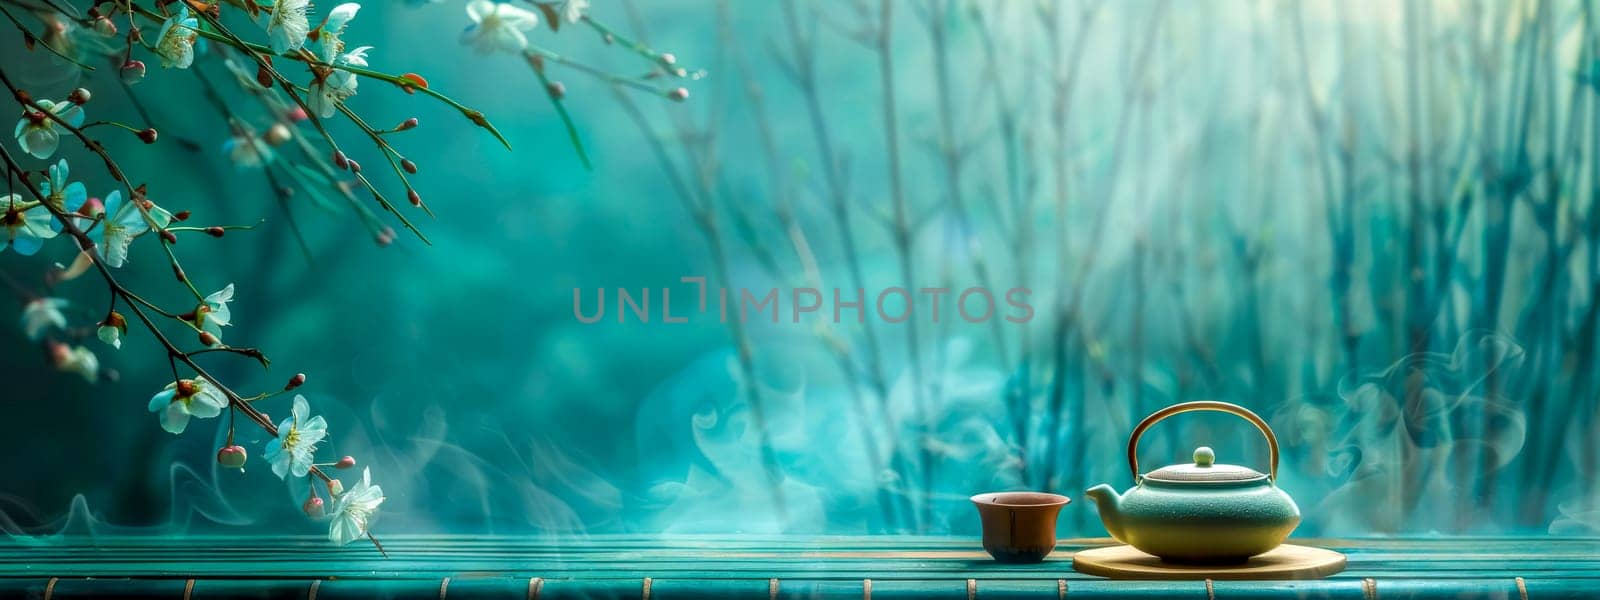 Misty morning with a ceramic tea set surrounded by blooming branches against a turquoise backdrop